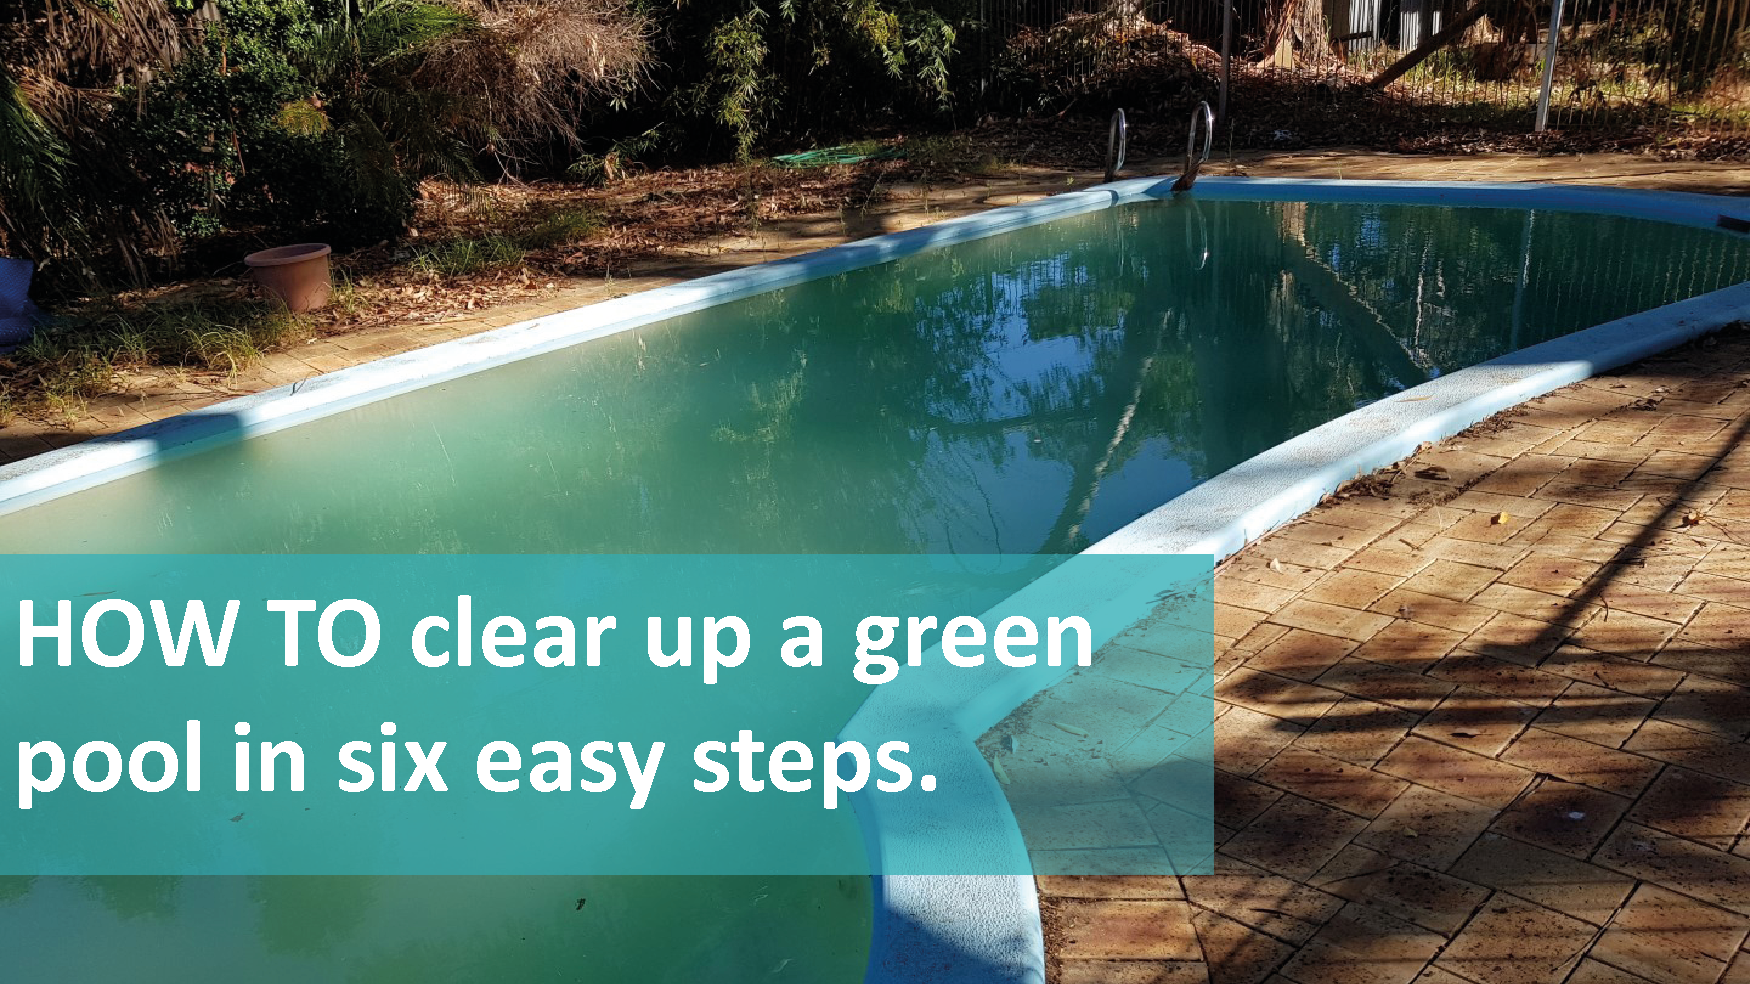 How To Clear Up A Green Pool In 6 Easy Steps